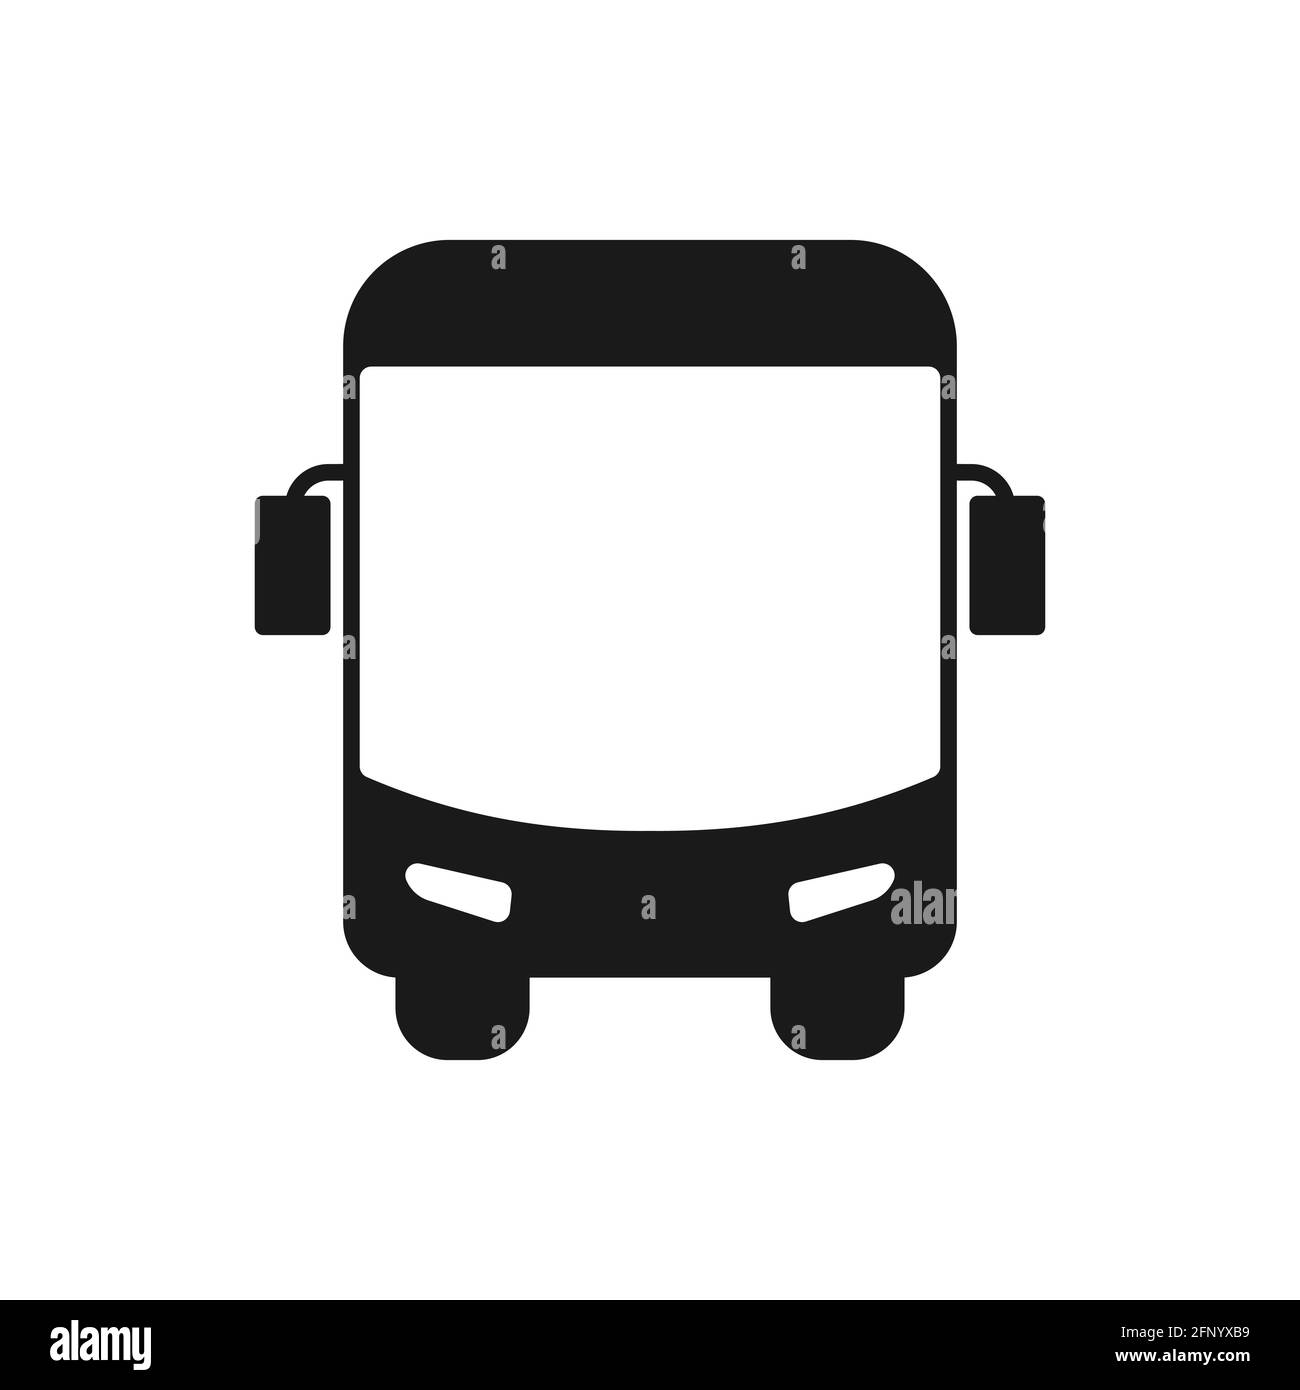 Bus icon. Public transport symbol. Vector illustration in flat trendy style isolated on white. Automobile silhouette Stock Vector